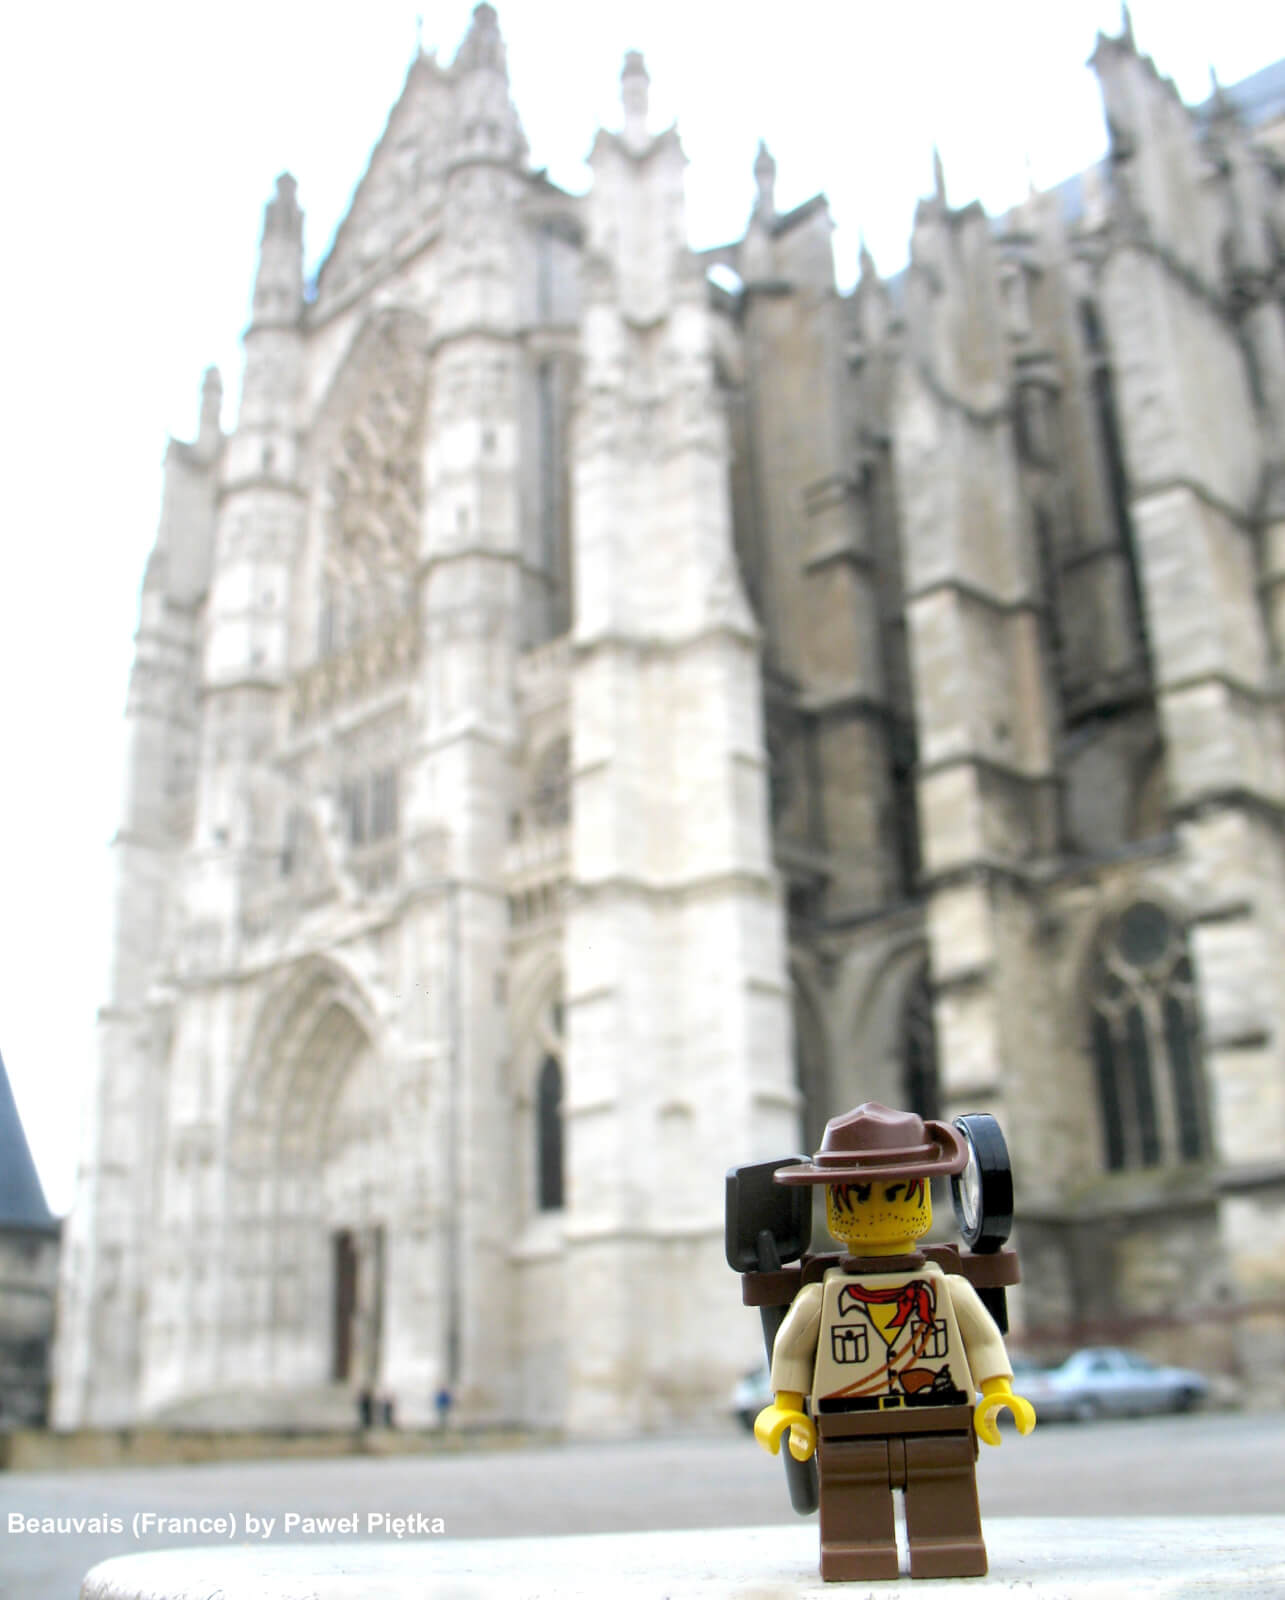 Beauvais (France) - The Cathedral of Saint Peter 1